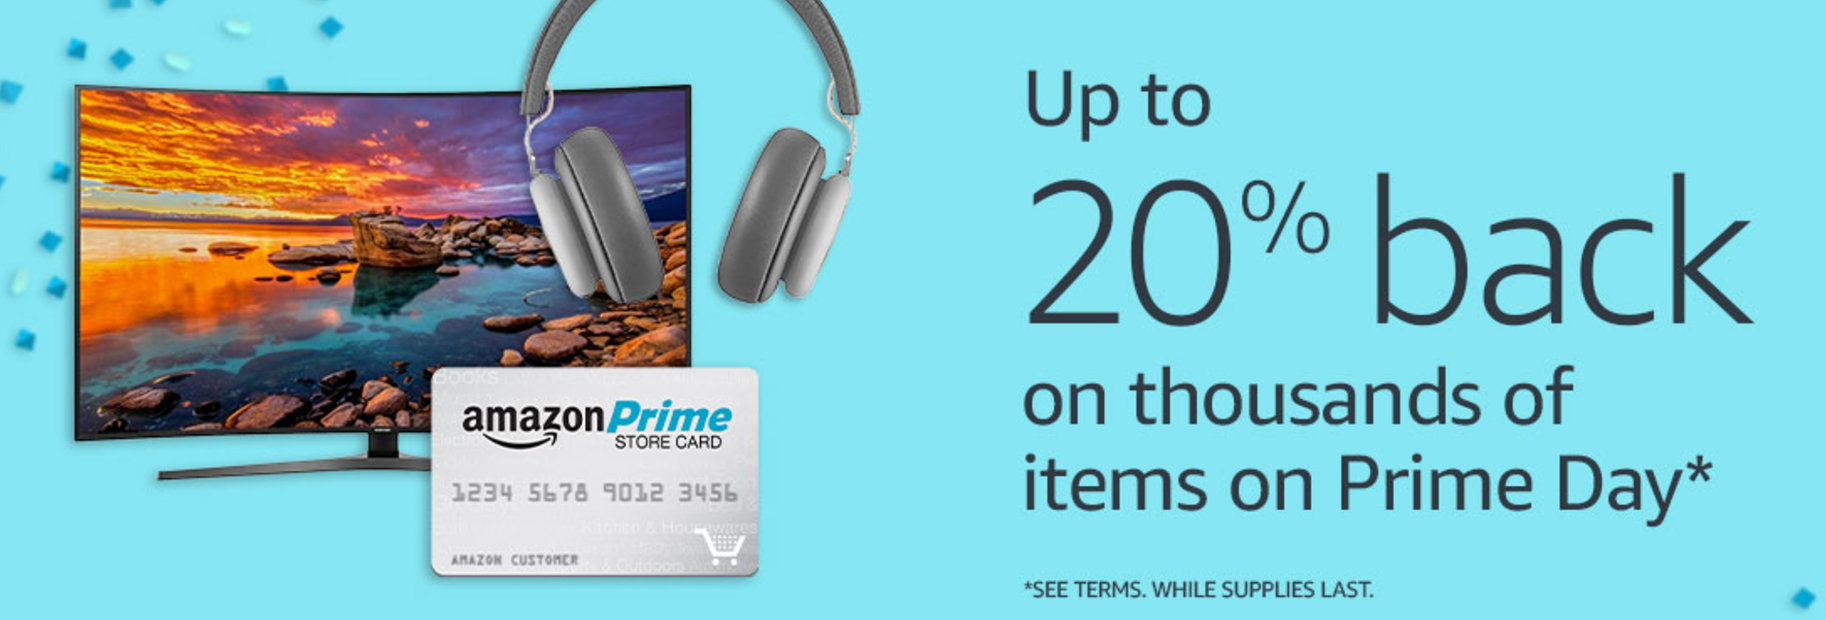 Got an Amazon Store Card? Get Up to 20% Back on Prime Day!